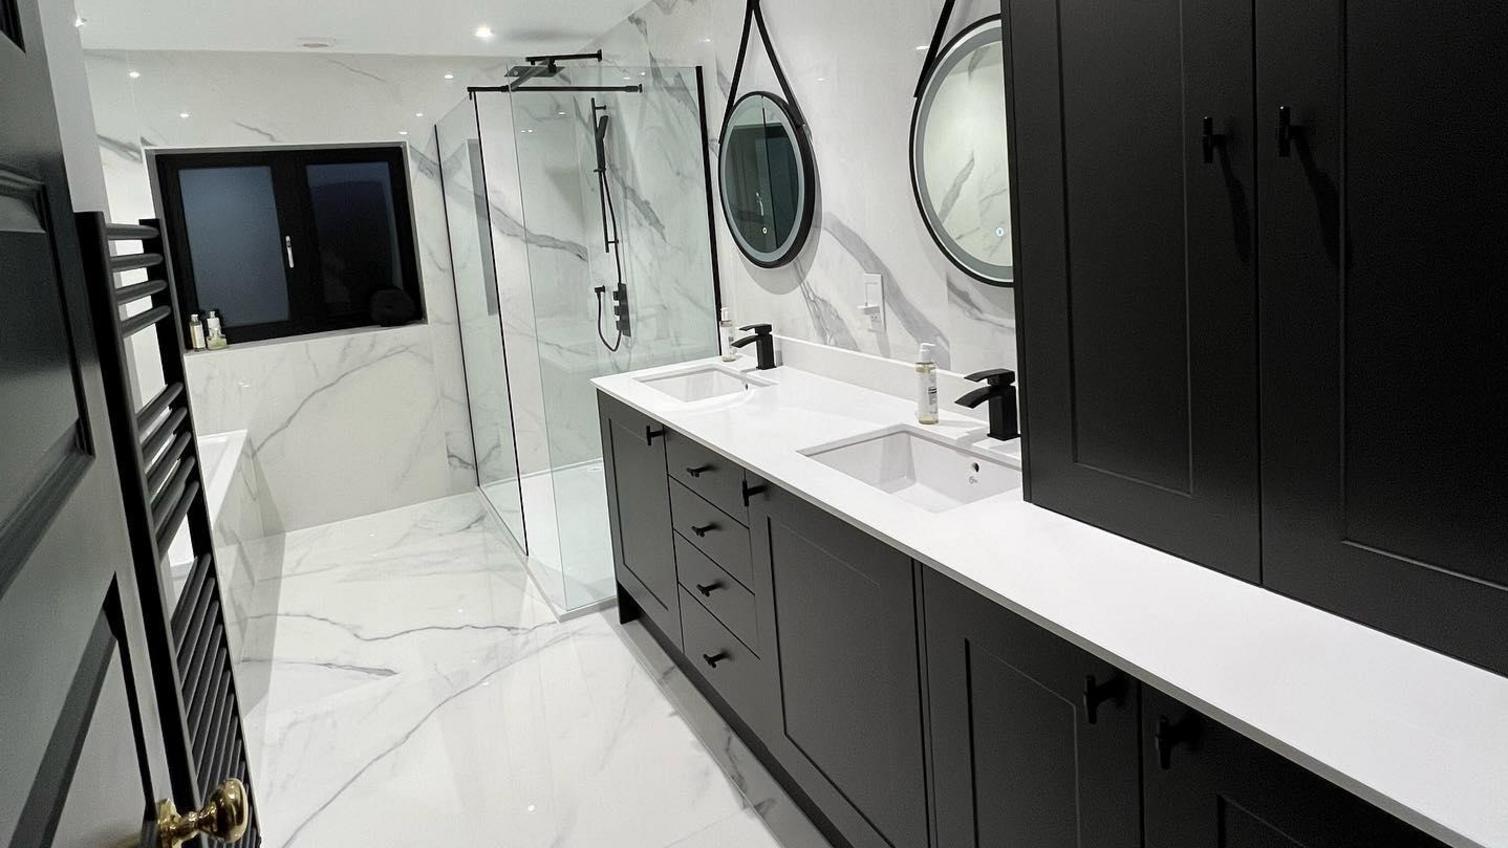 Monochrome bathroom idea featuring black shaker cupboard doors and white worktops. Has black handles and an undermount sink.